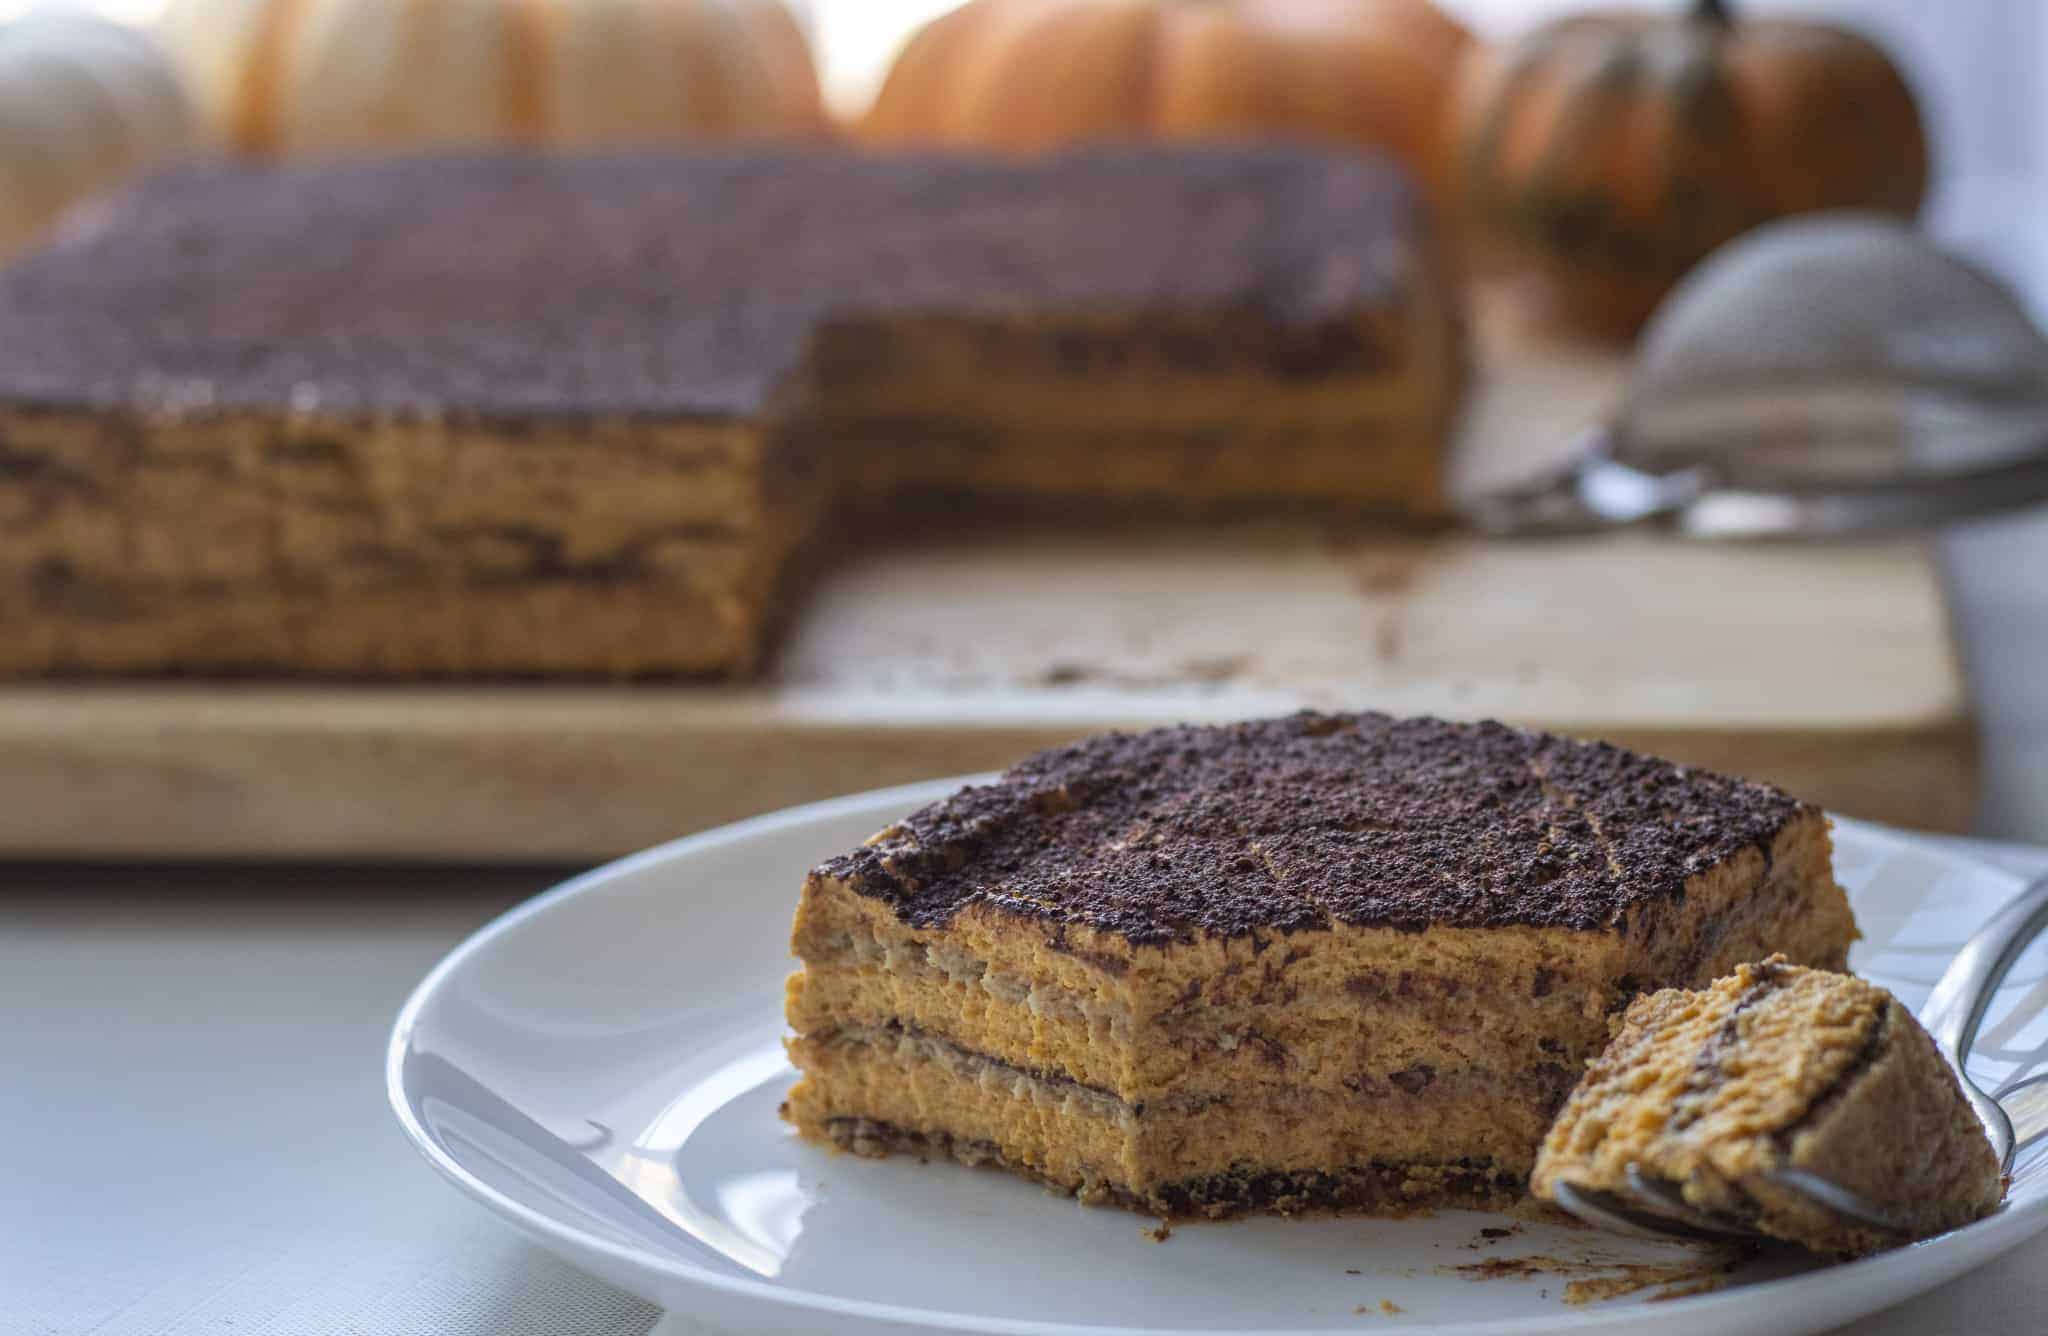 Slice of pumpkin icebox cake with a forkful next to it and the cake in the background with pumpkins